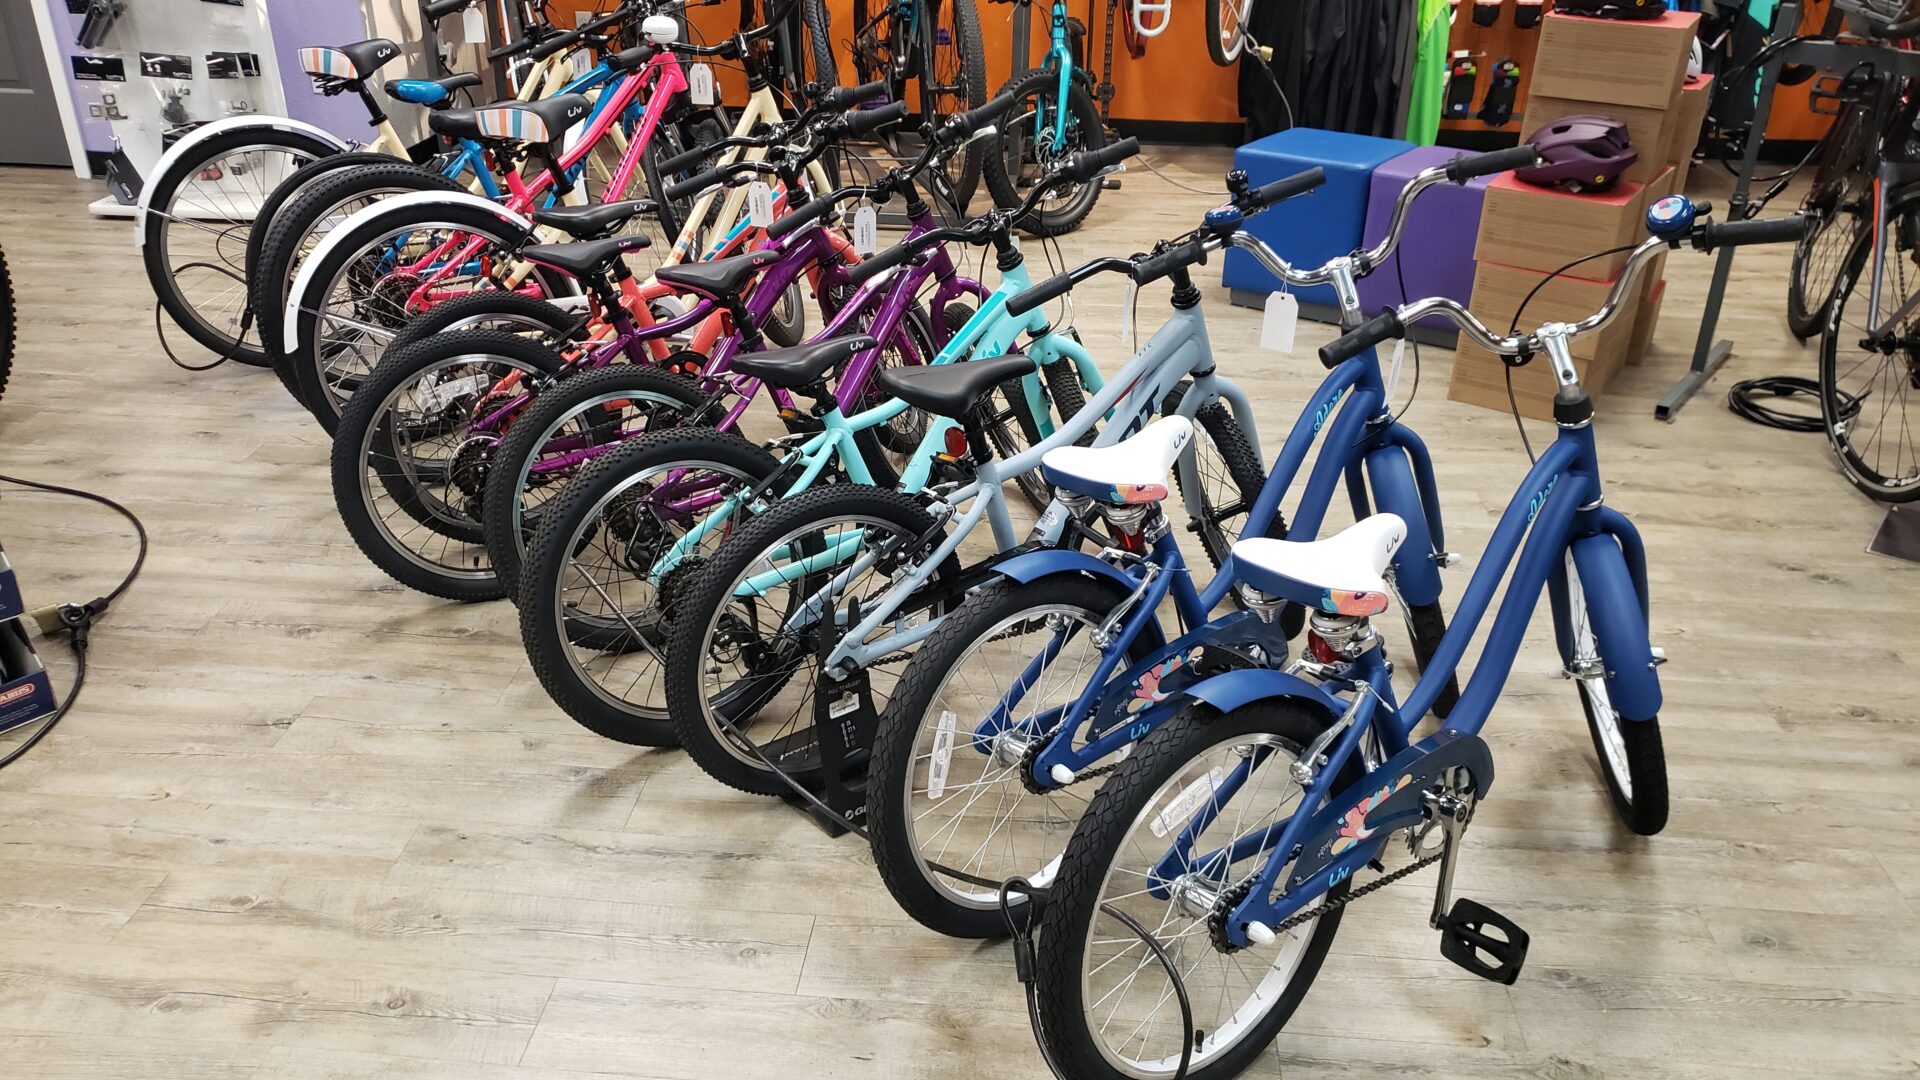 A collection of colorful quality bikes